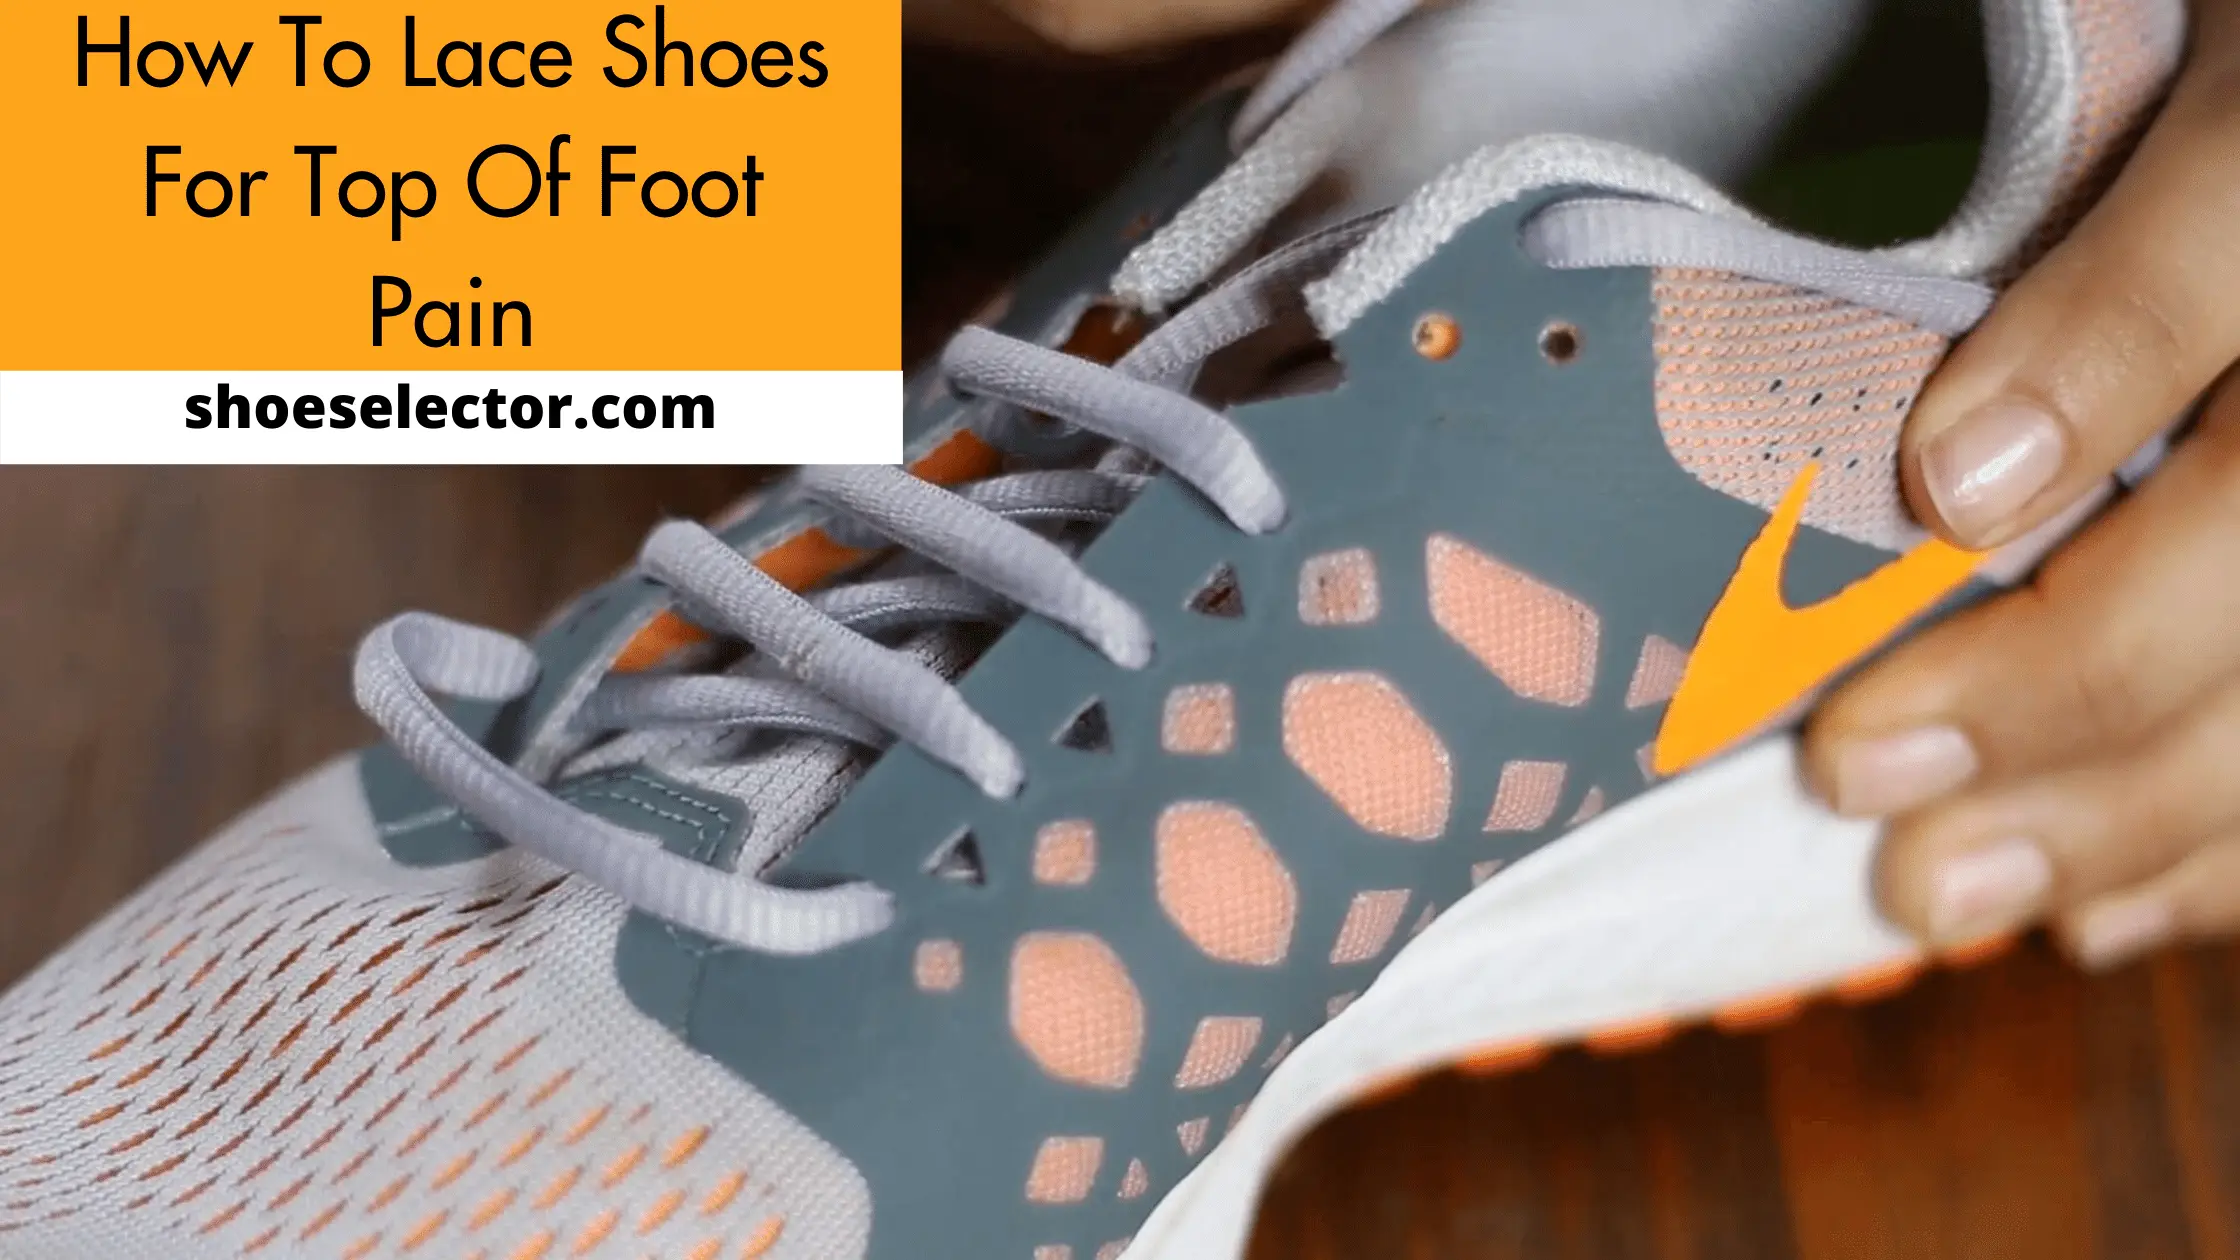 How To Lace Shoes For Top Of Foot Pain? - Solution Guide